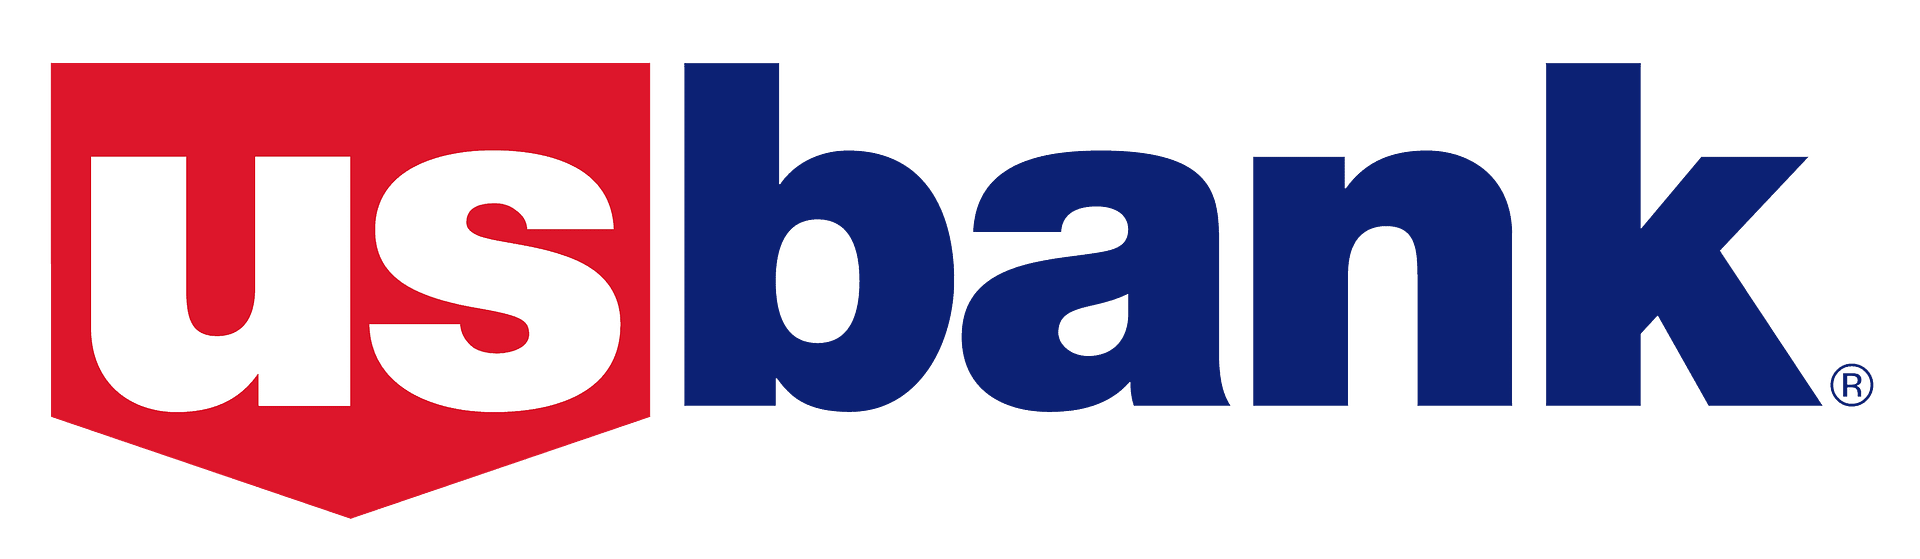 logo for US Bank